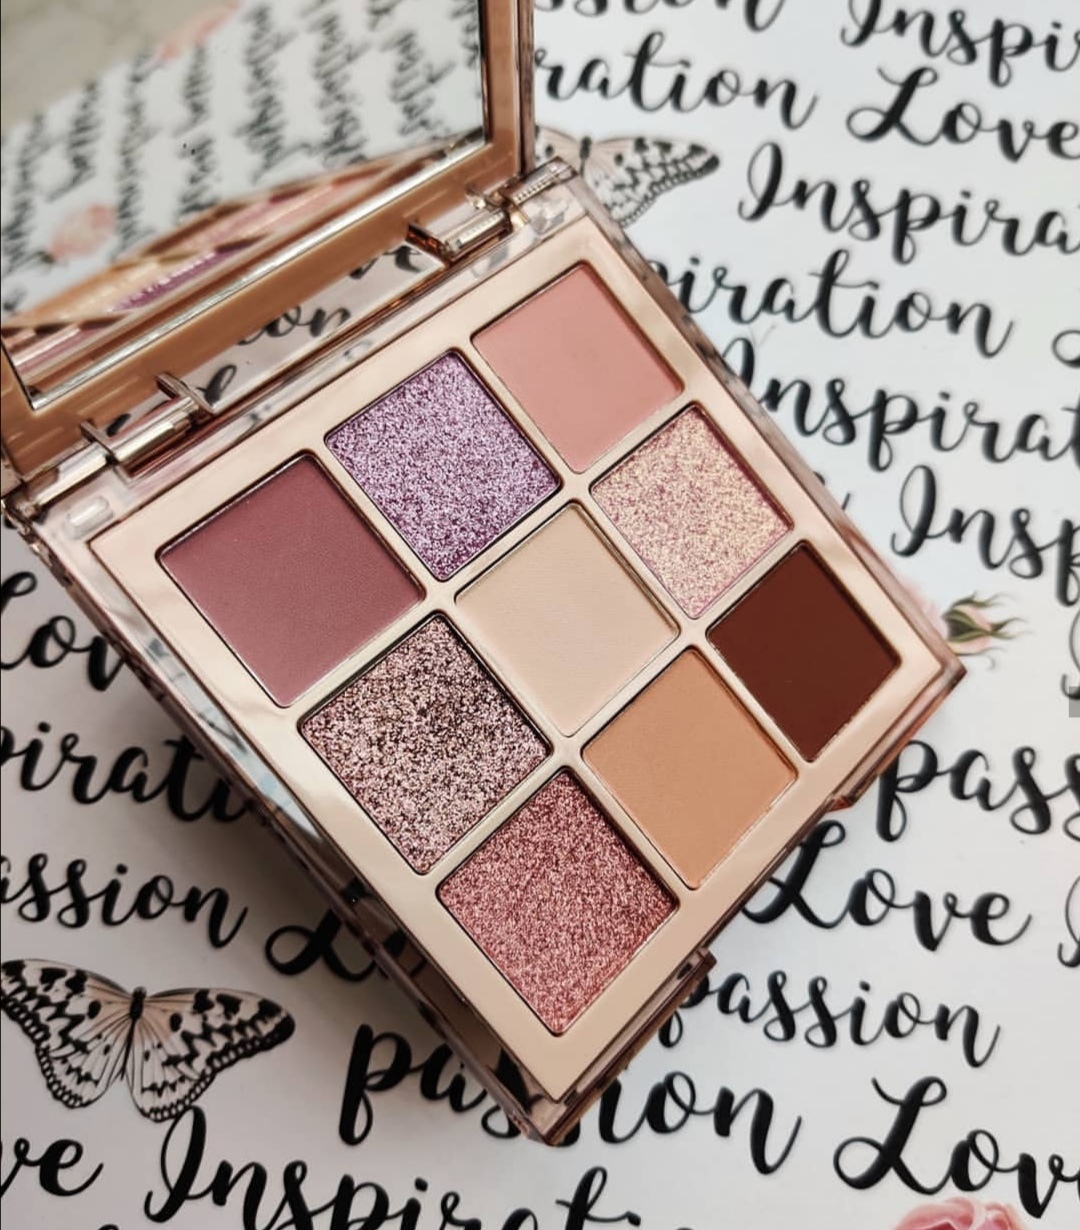 Huda Beauty Nude (Light) Obsessions Eyeshadow Palette| Review & Swatches